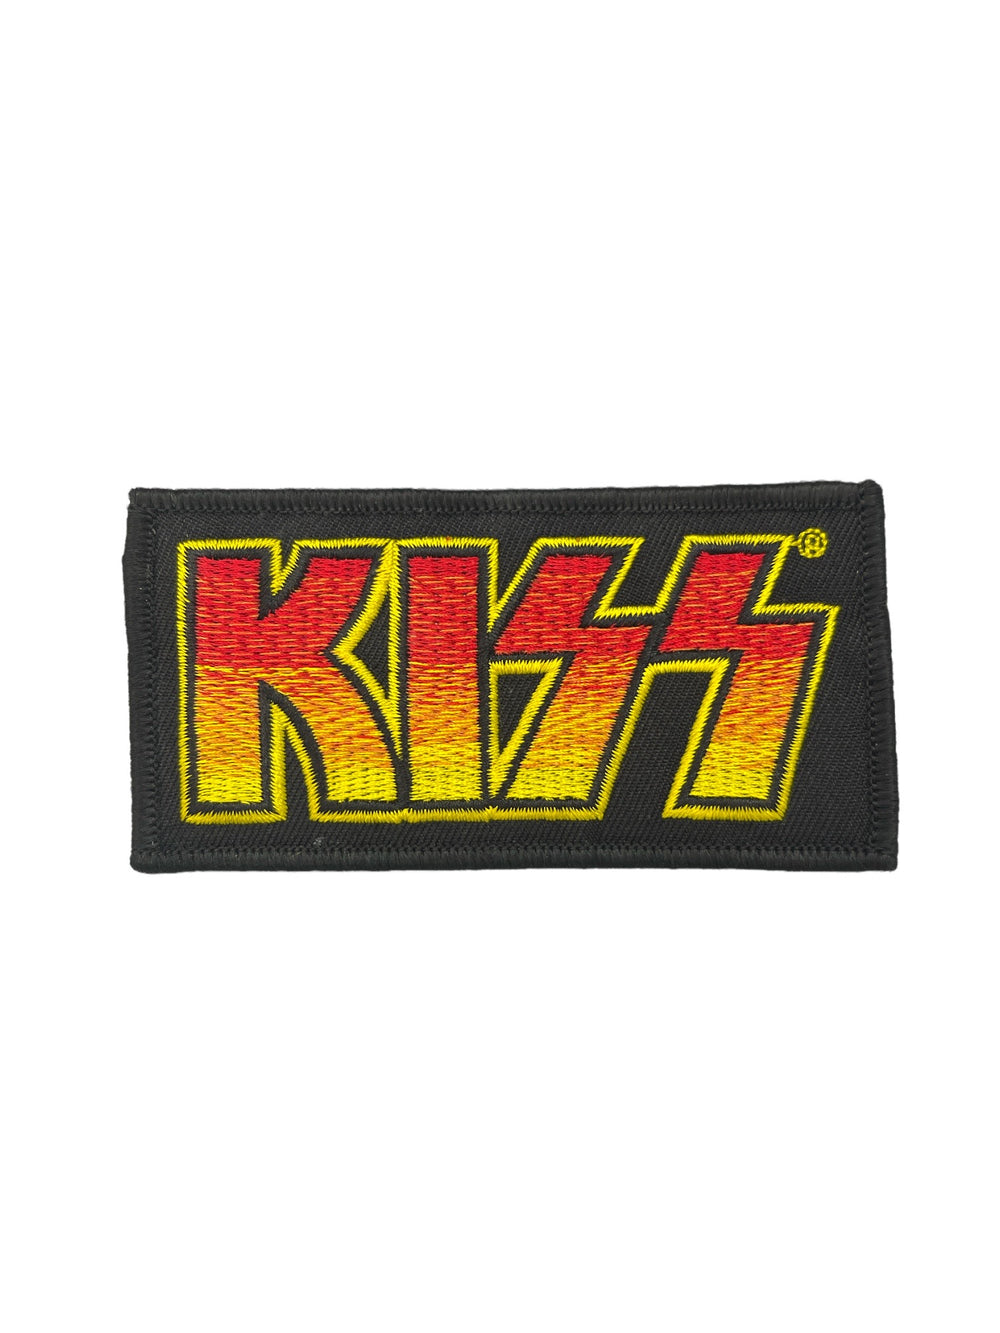 KISS Classic Logo Official Woven Patch Brand New